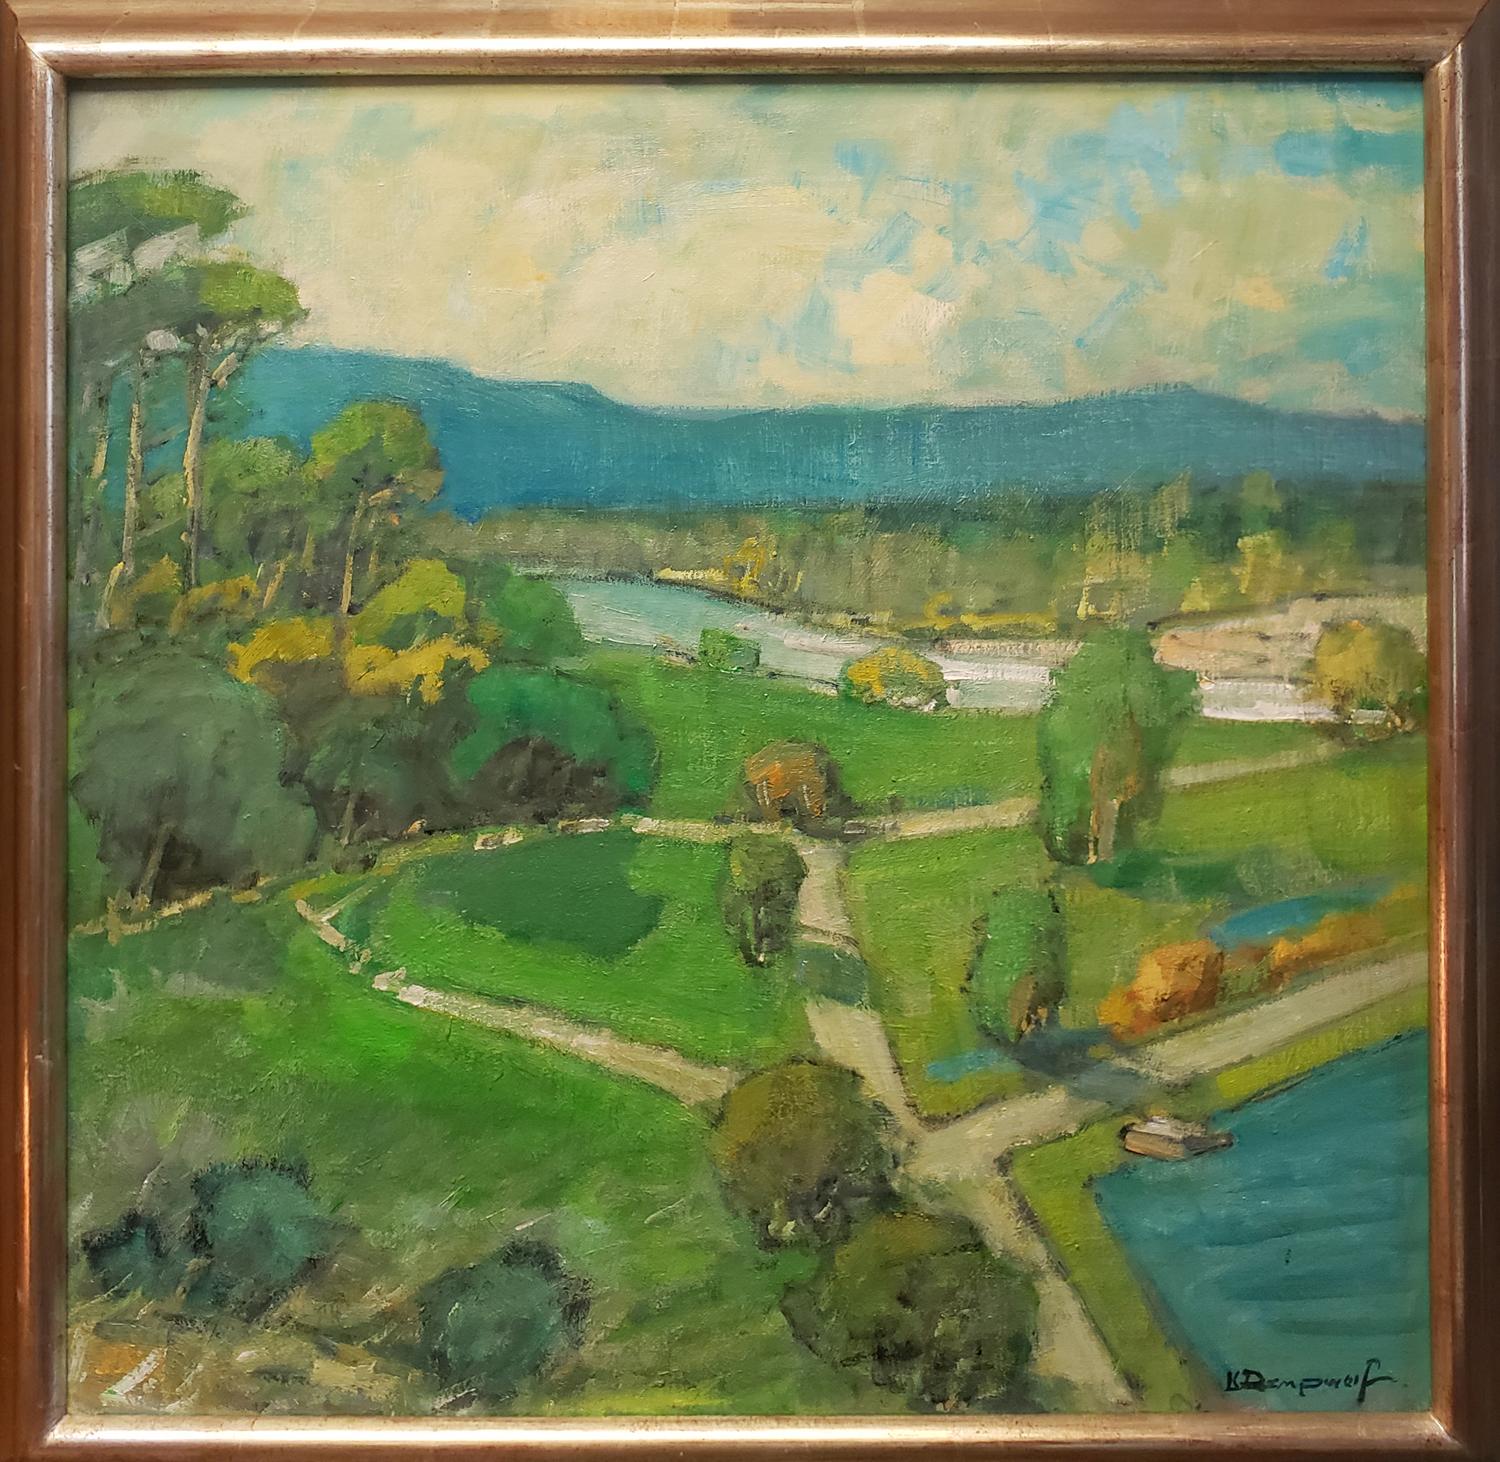 Hahamongna Park, The Arroyo - Painting by Karl Dempwolf